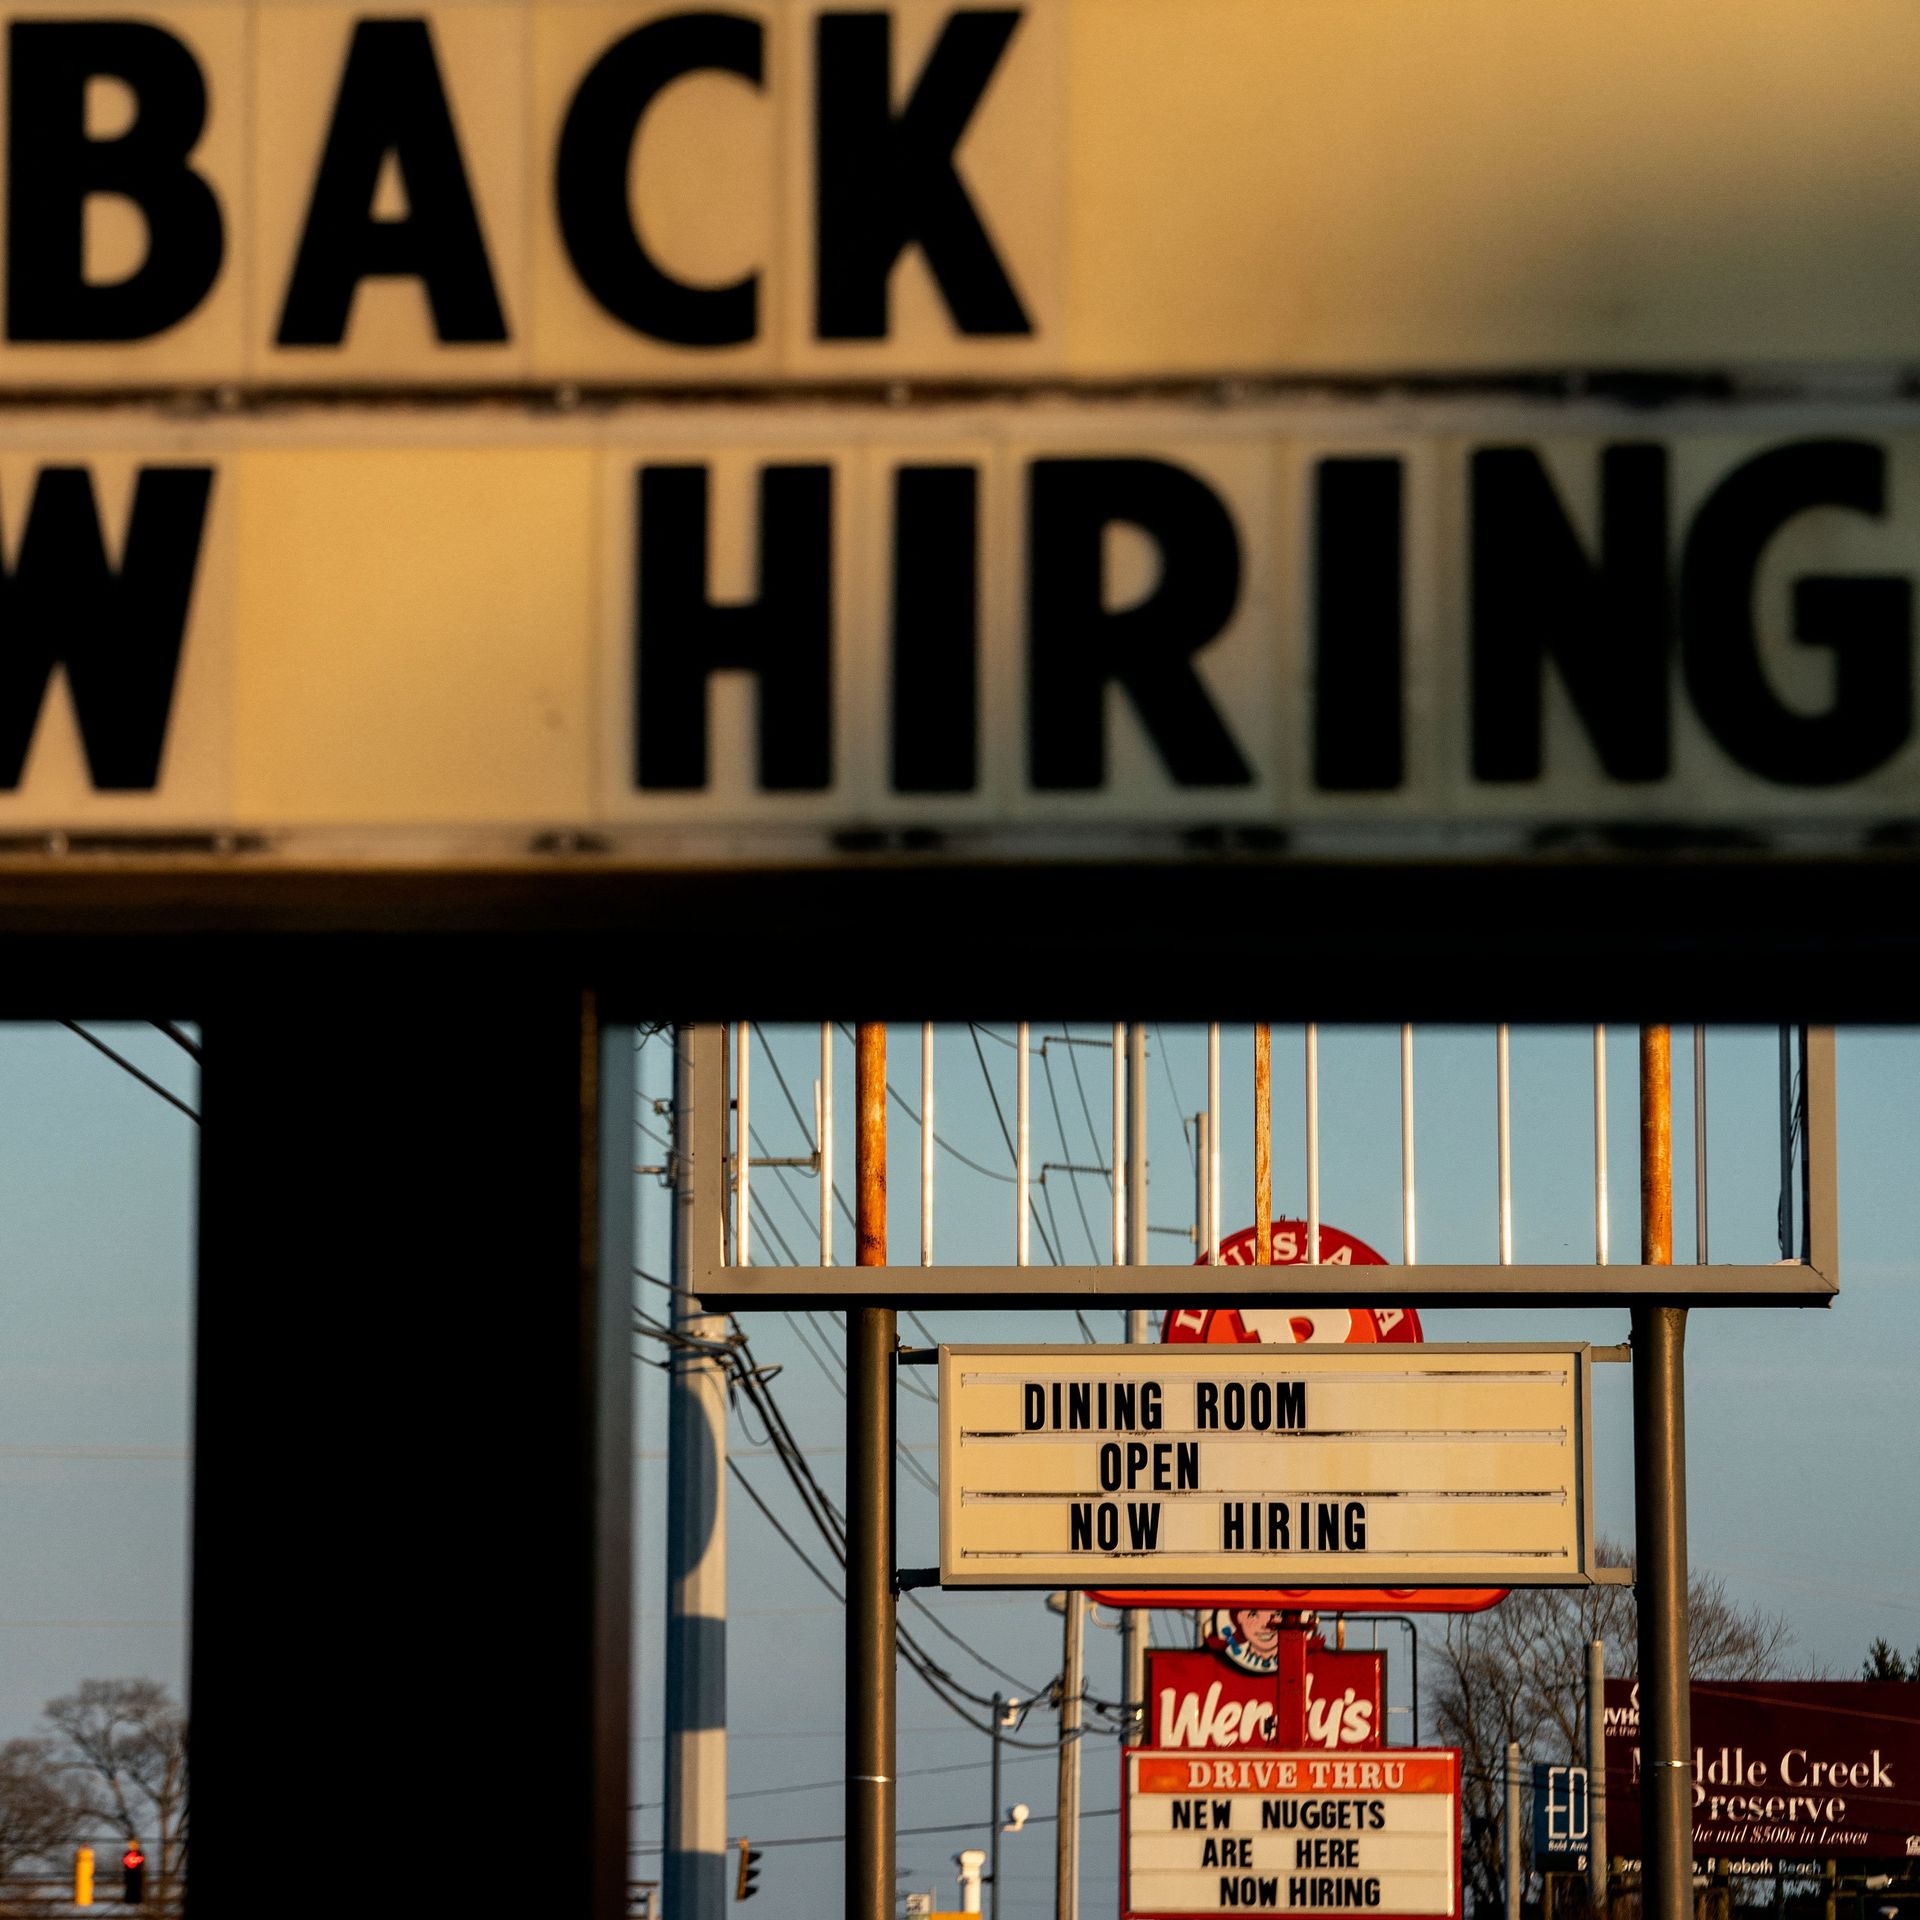 Now hiring sign